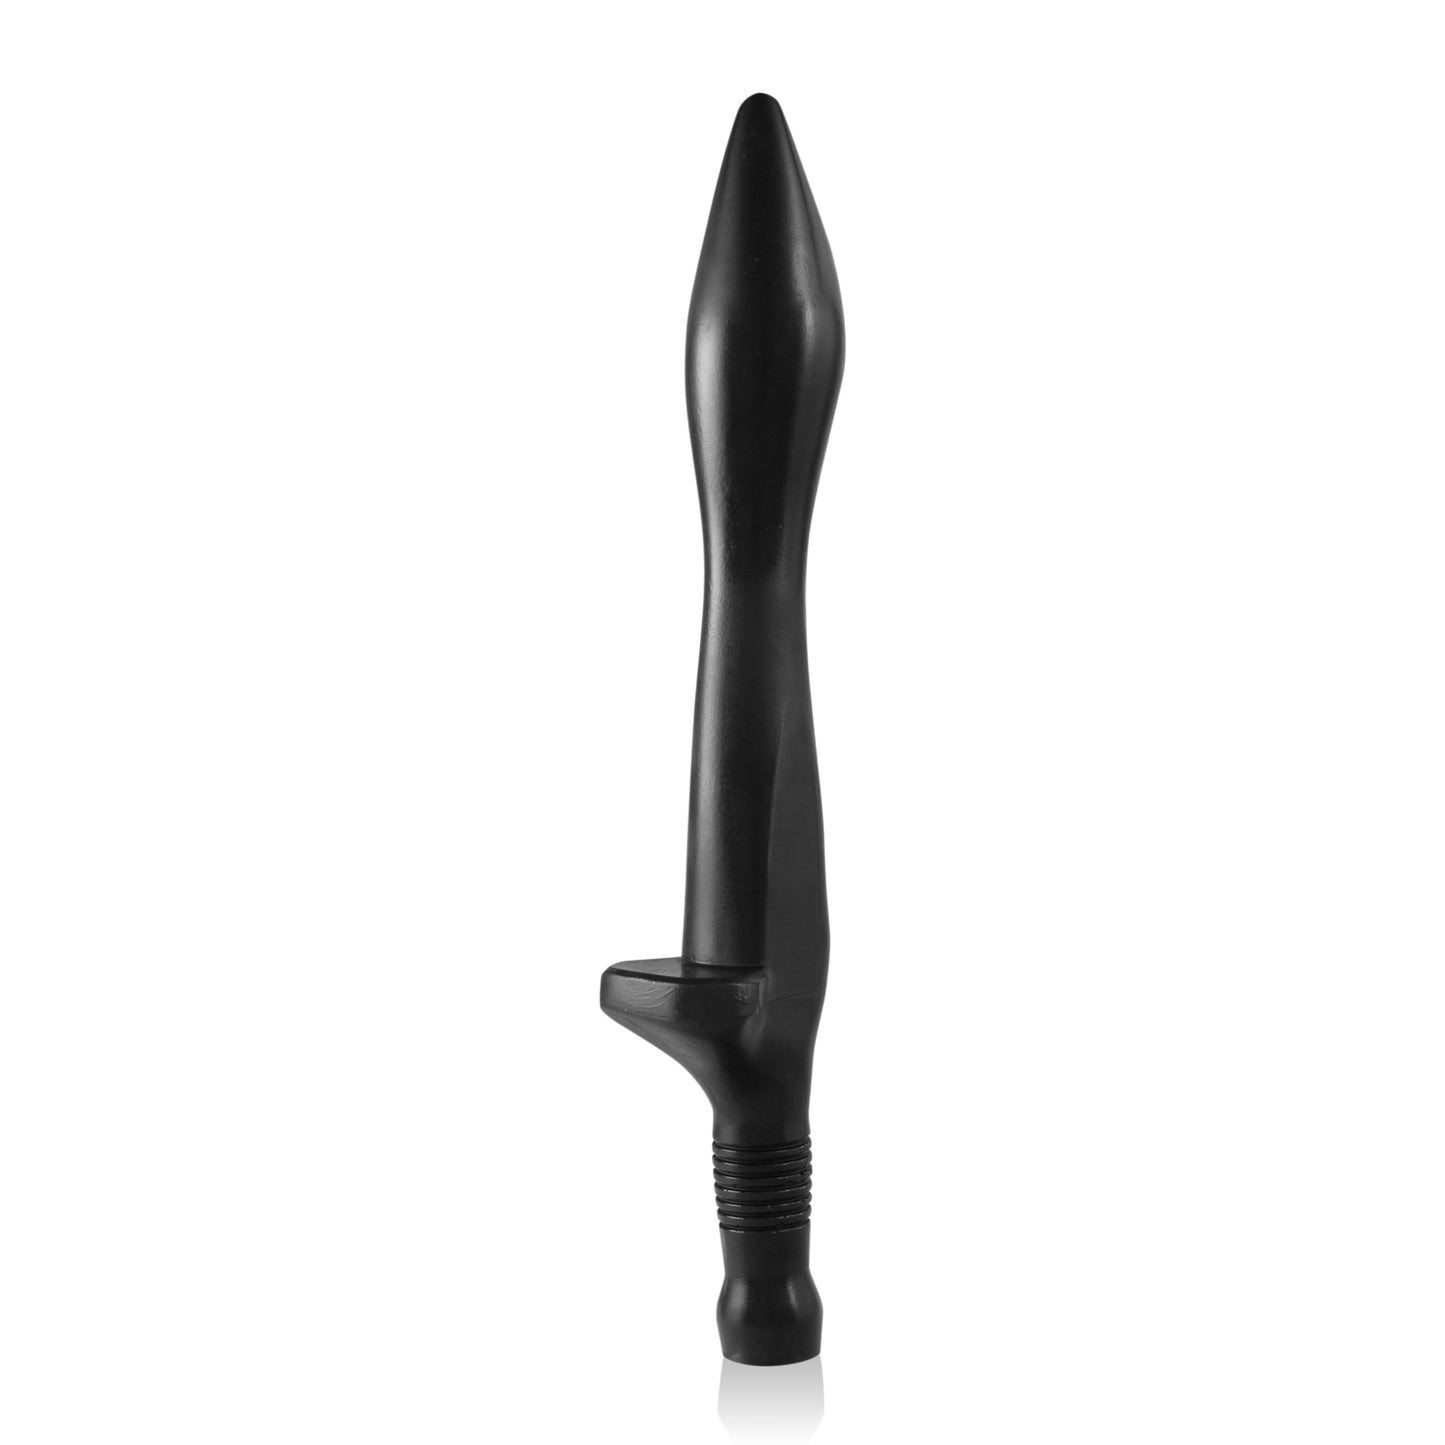 Goose Small w/ Handle Black - Just for you desires